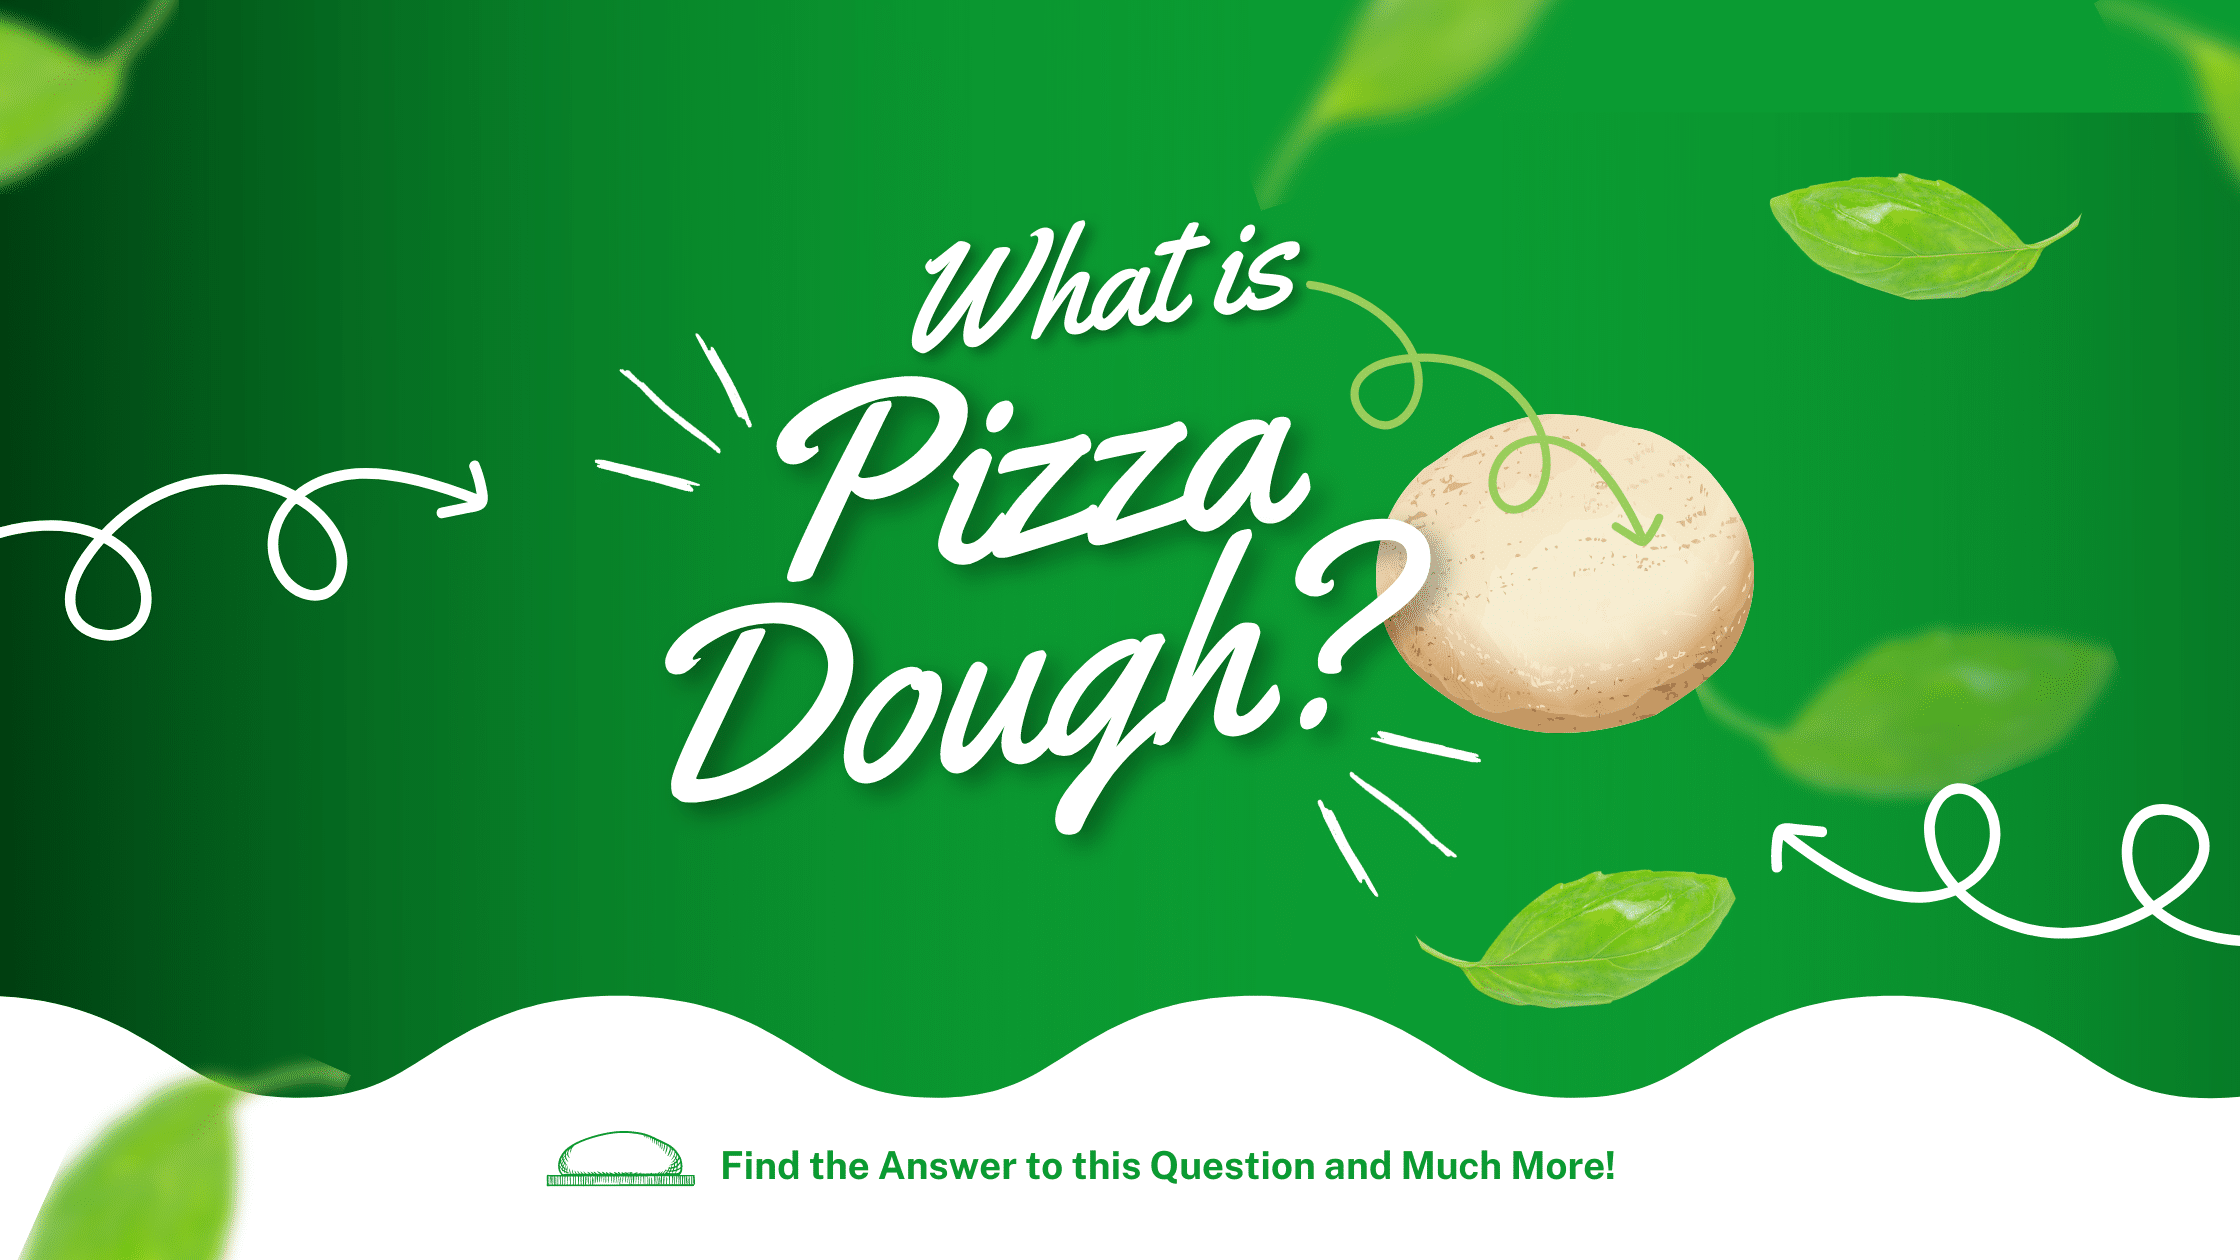 What is pizza dough